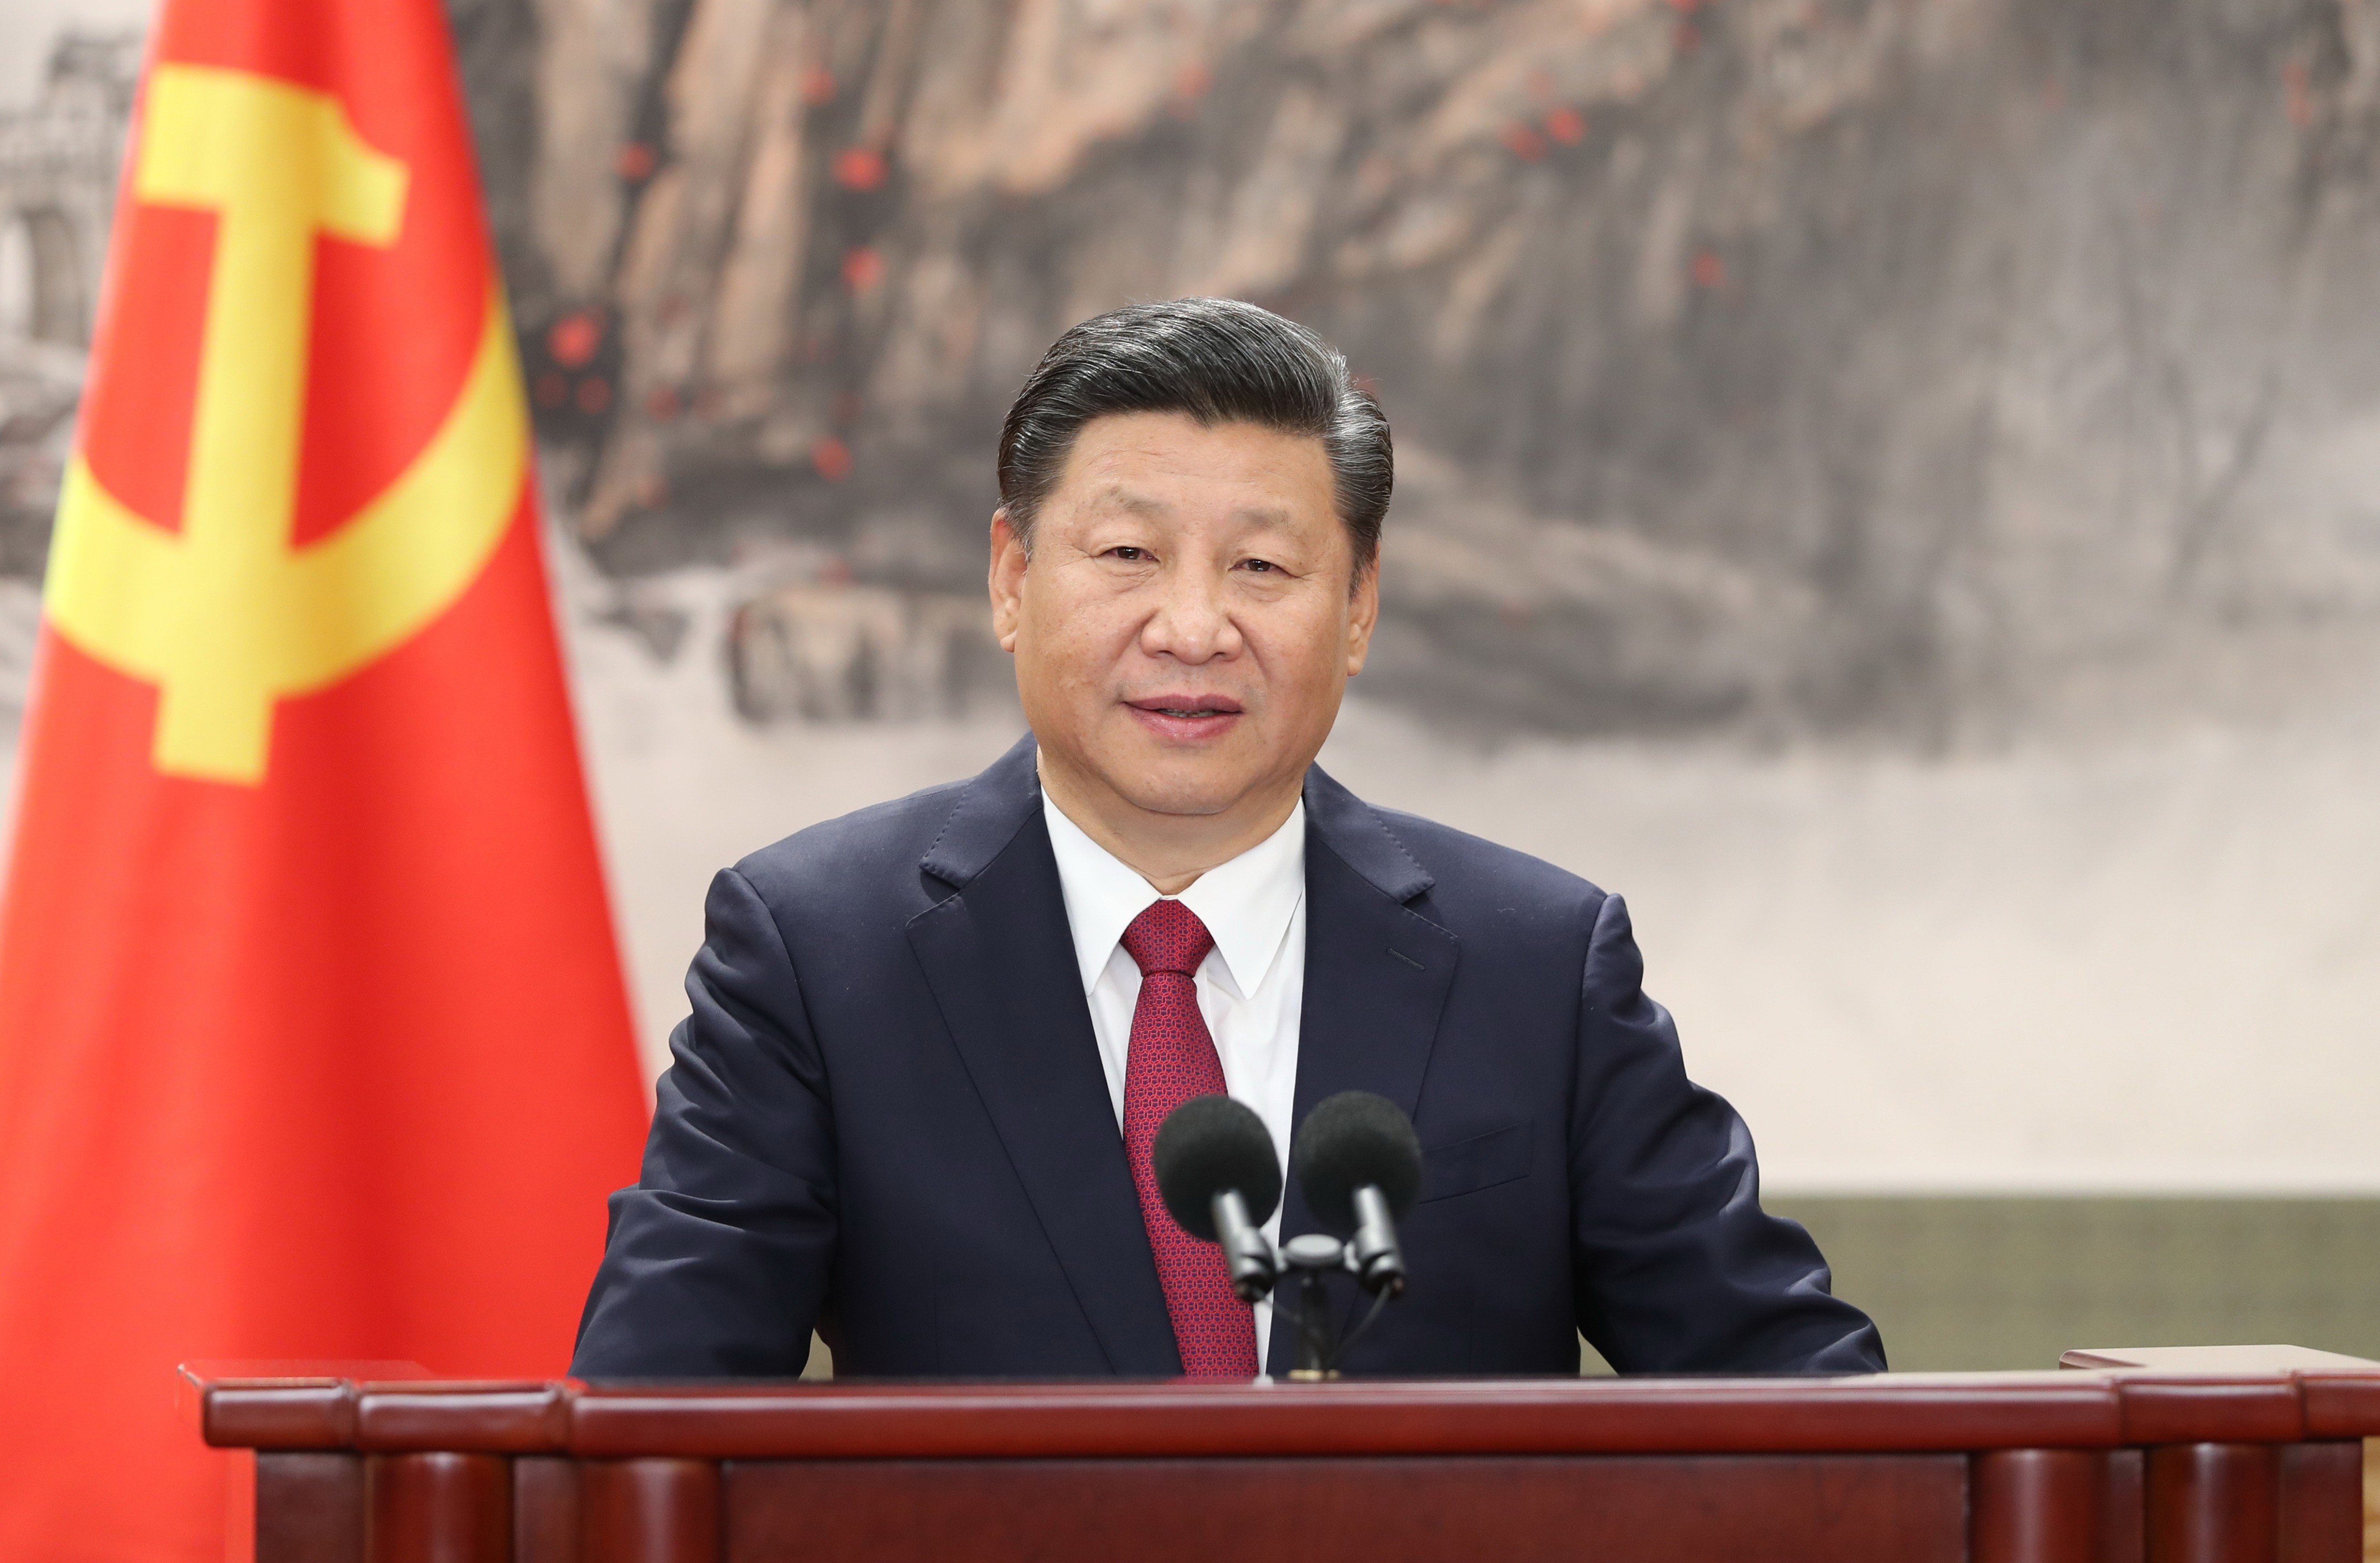 Xi Jinping told the Chinese Communist Party’s 19th congress that the country must become ‘a leader in terms of composite national strength and international influence’ by 2050. Photo: Xinhua